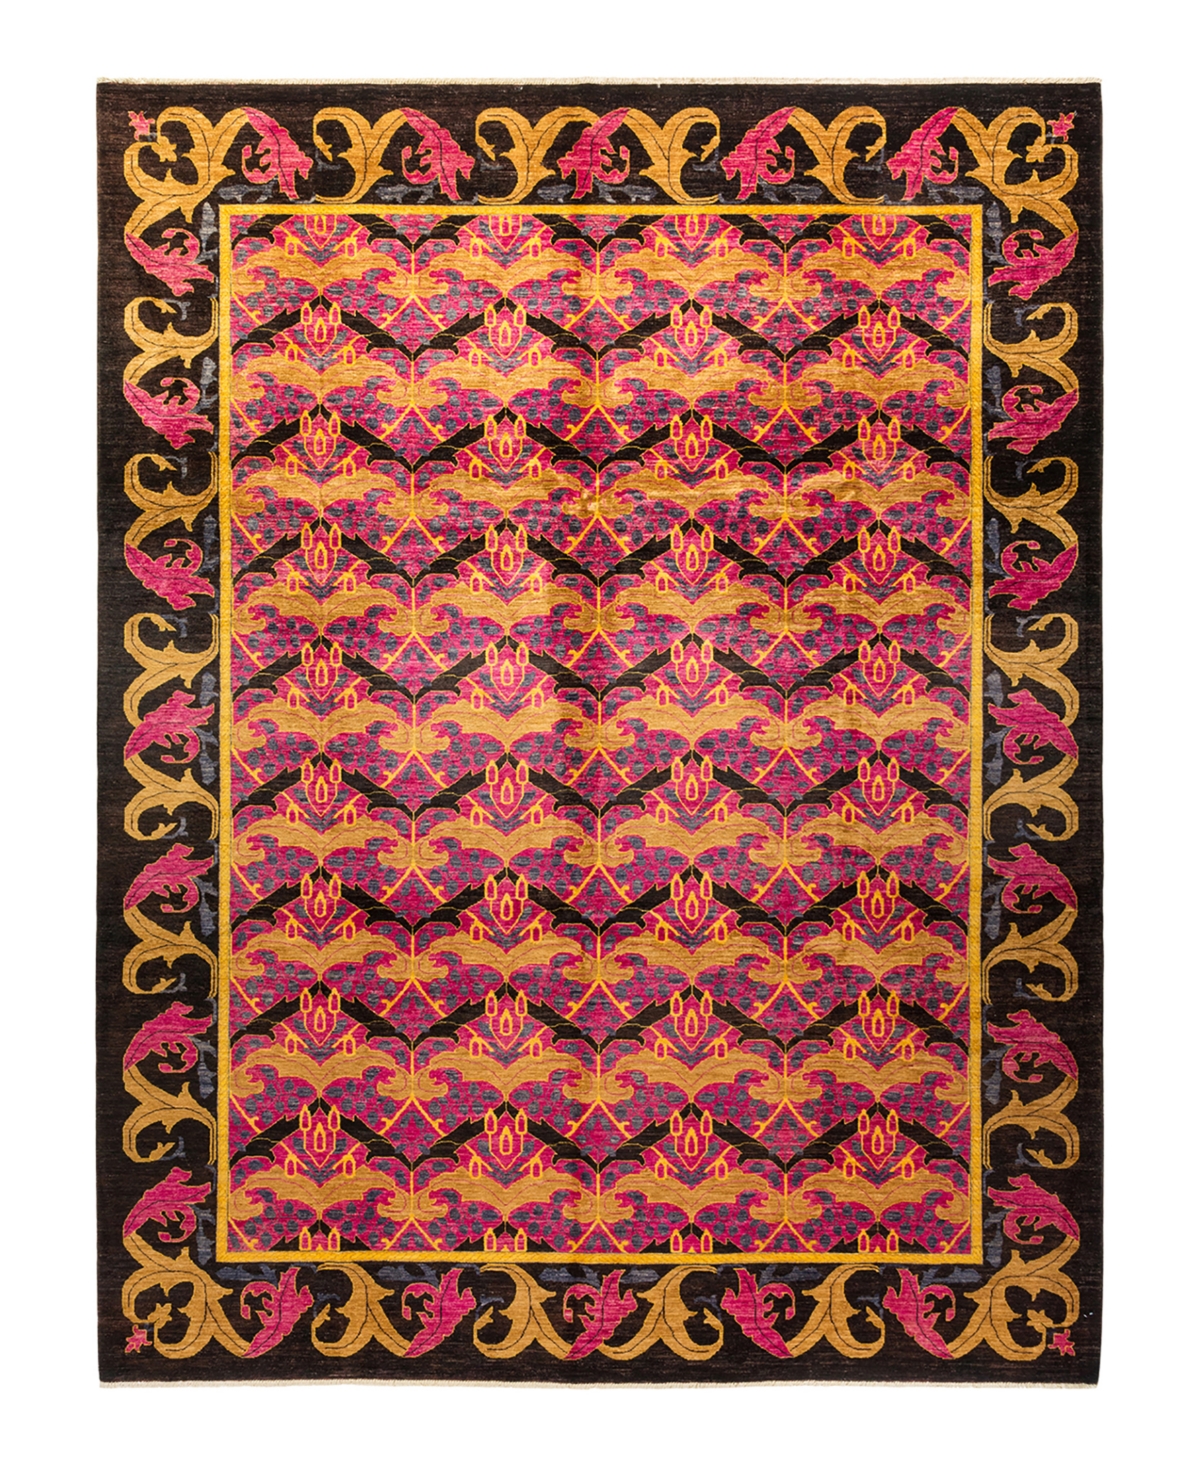 Adorn Hand Woven Rugs Arts and Crafts M1636 10'3in x 13'2in Area Rug - Black